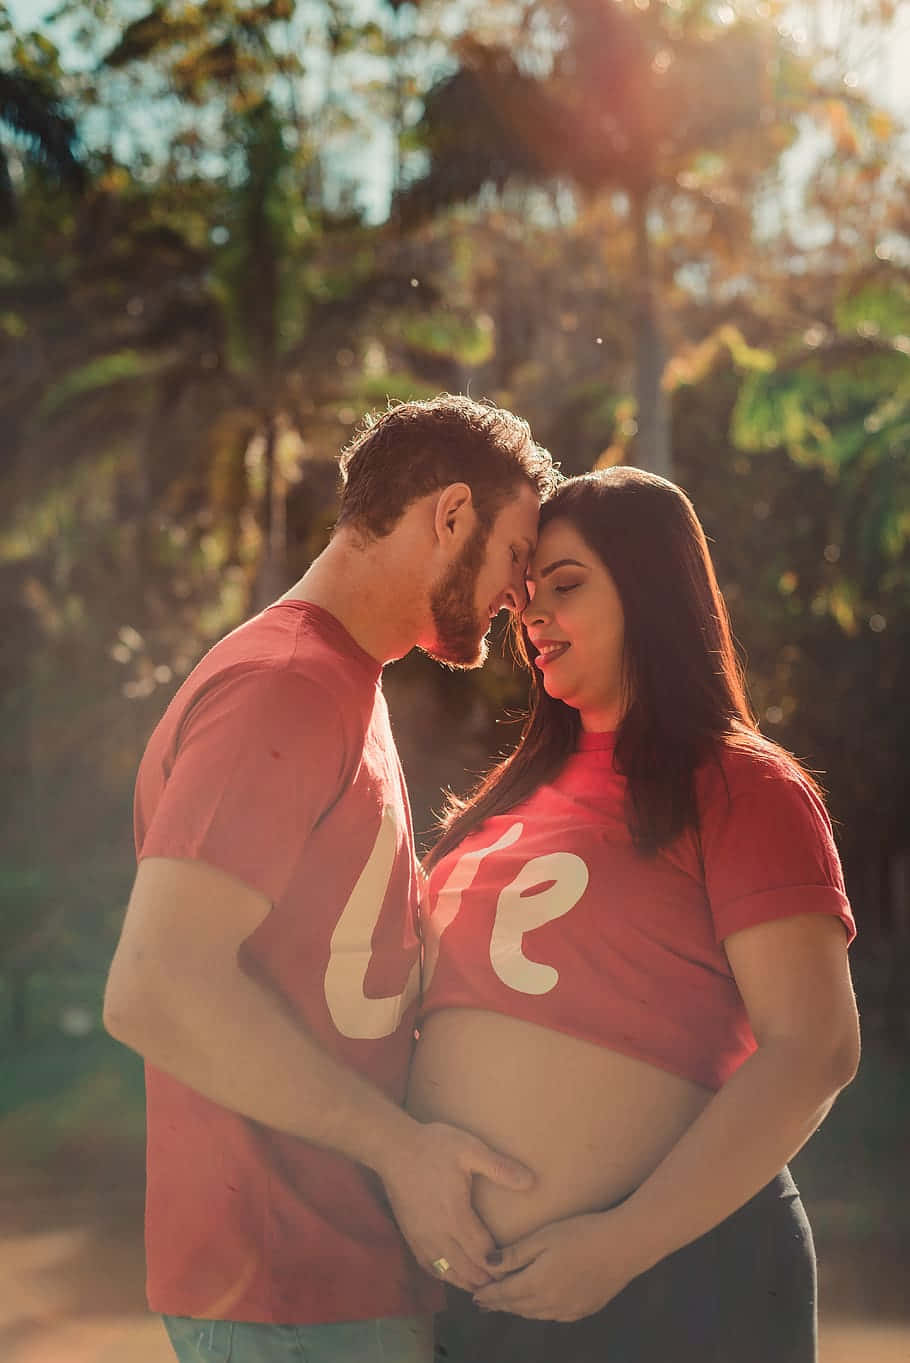 Pregnant Couple Shirt On Sunny Day Wallpaper